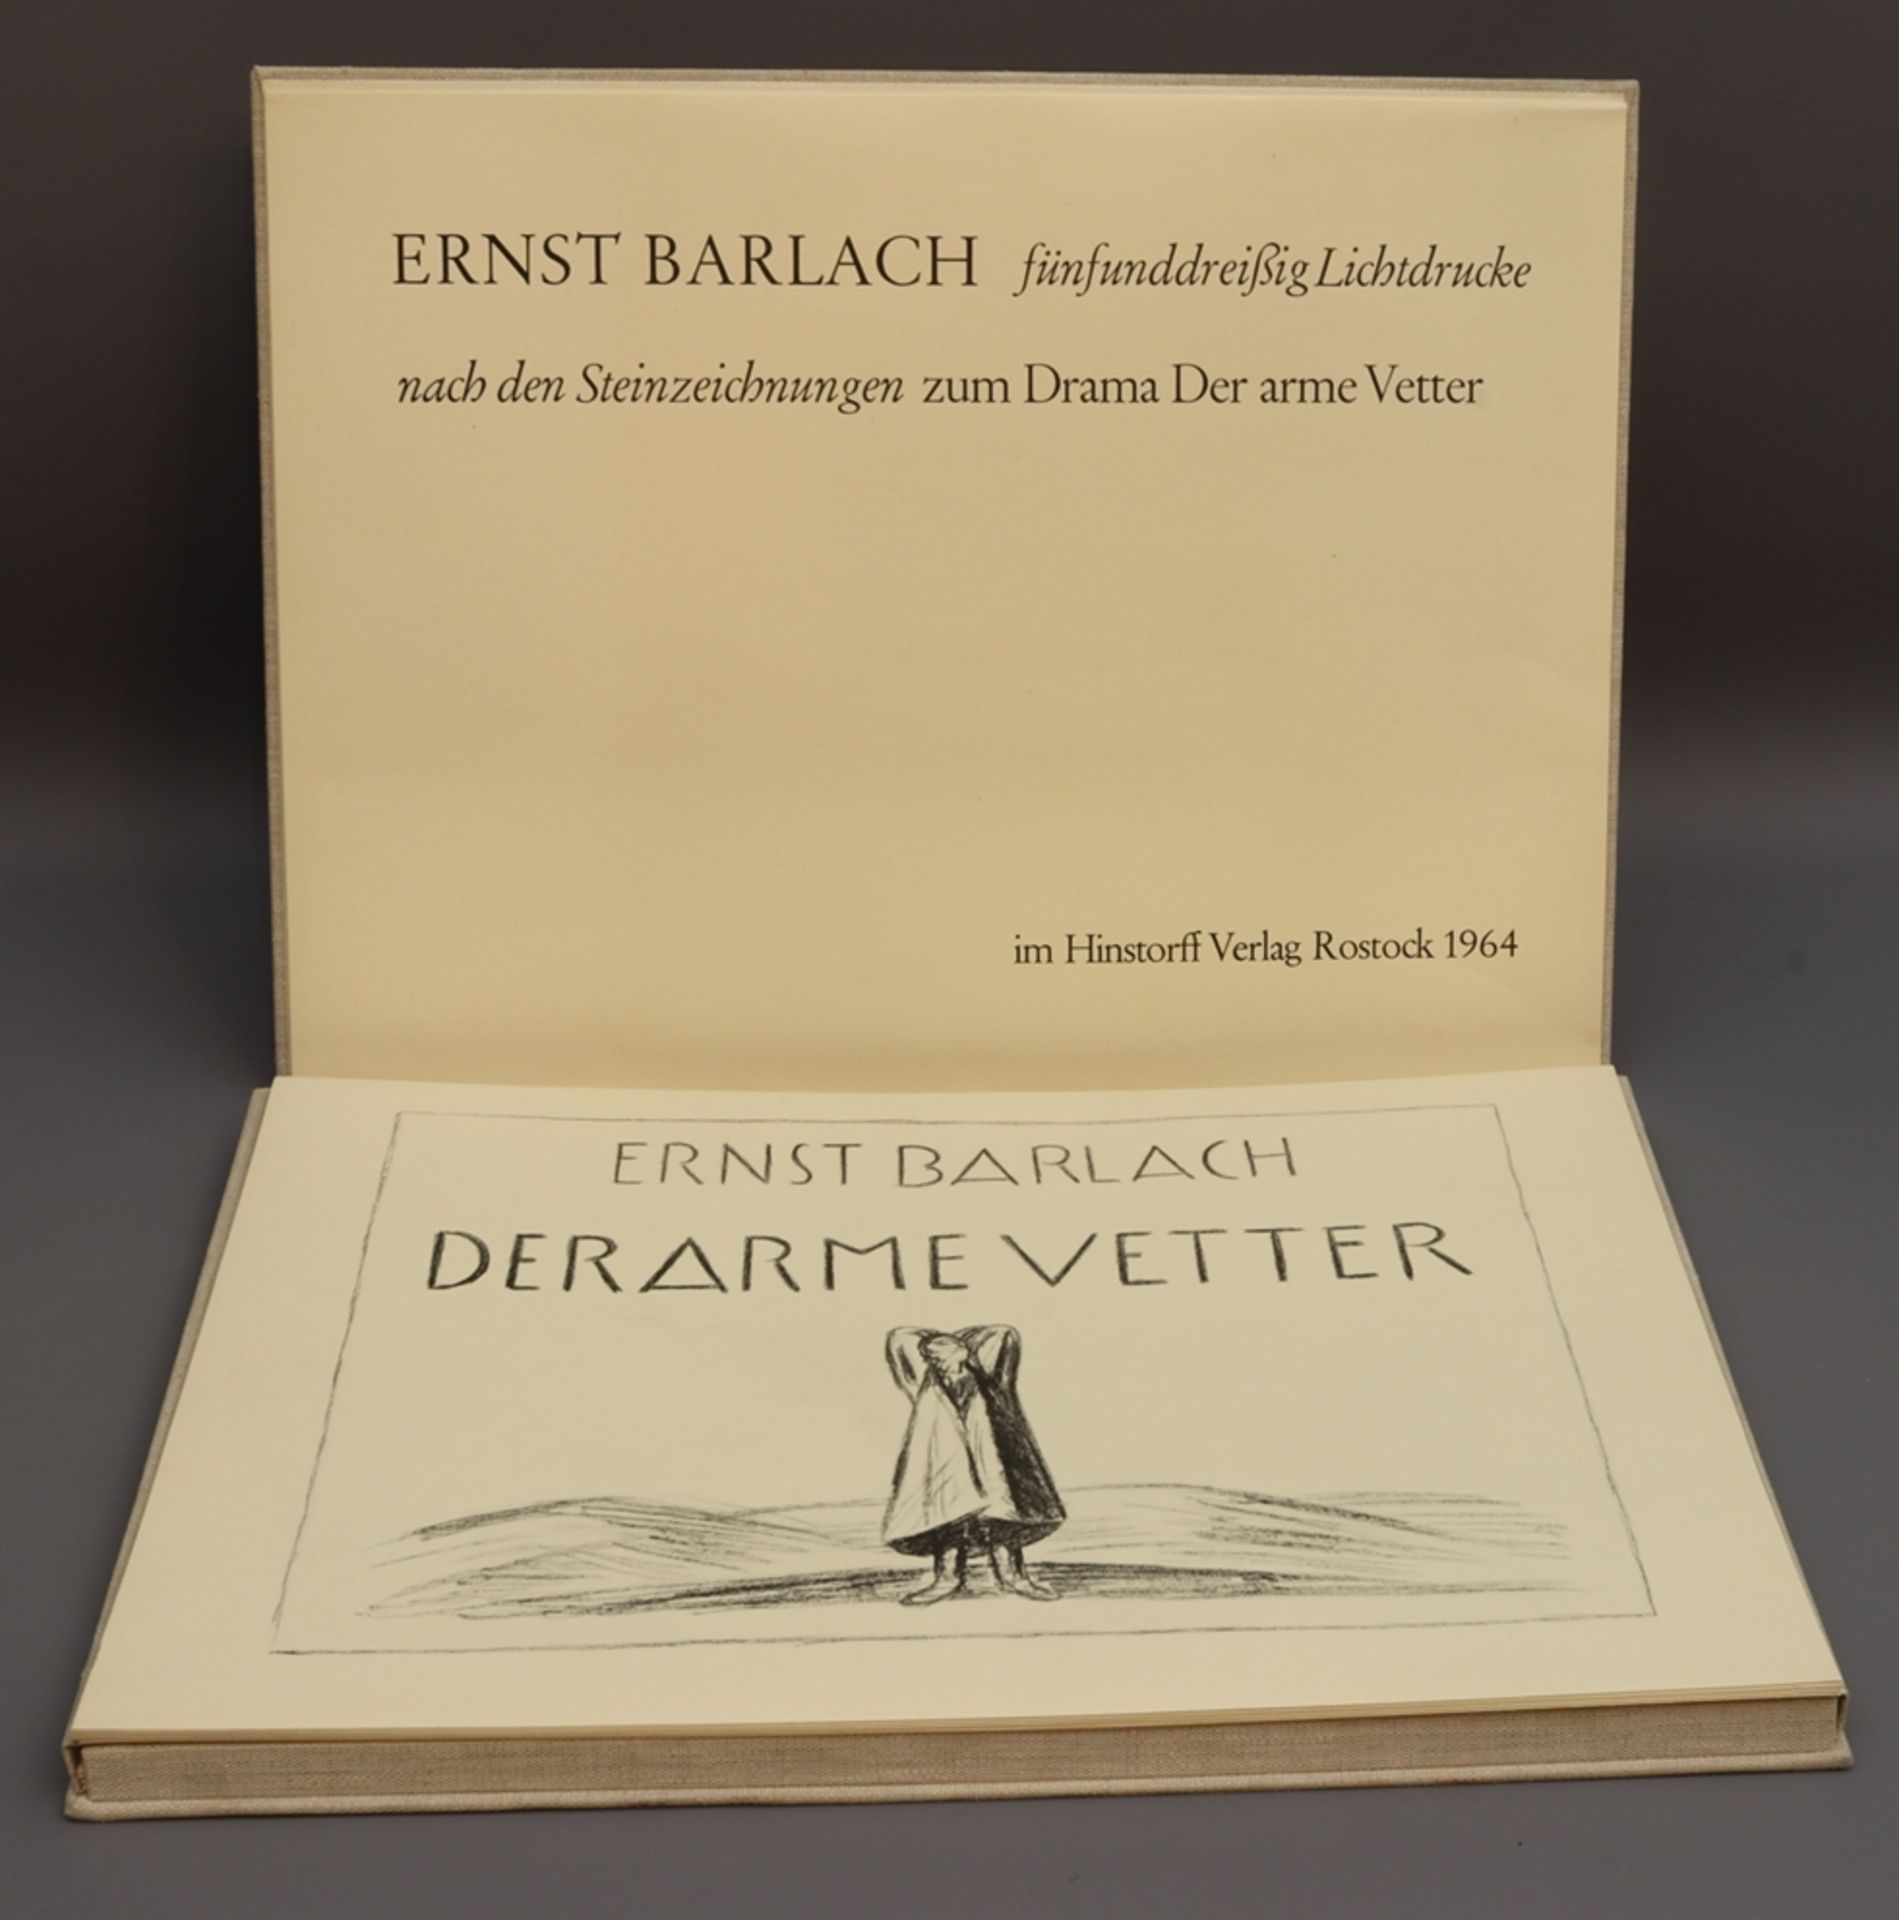 Ernst Barlach, Der arme Vetter, Textband mit Mappe, DDR 1964 - Image 2 of 6